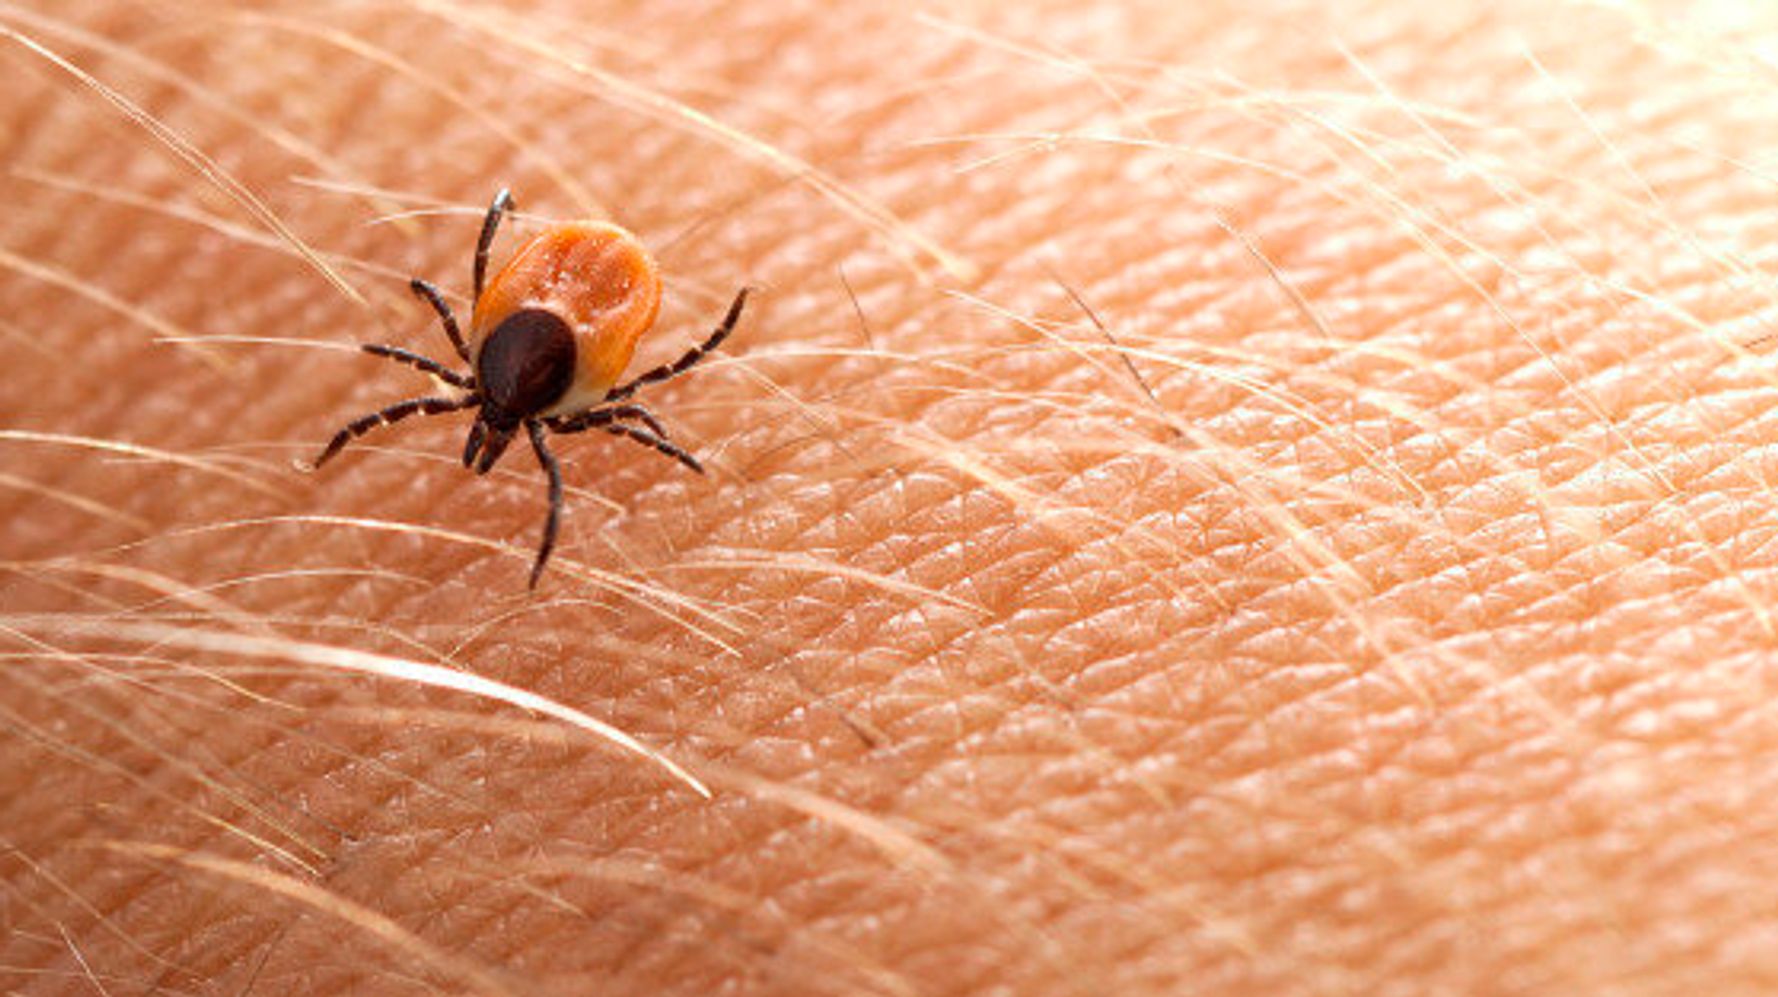 This Summer Protect Yourself From Tick Bites And Lyme Disease